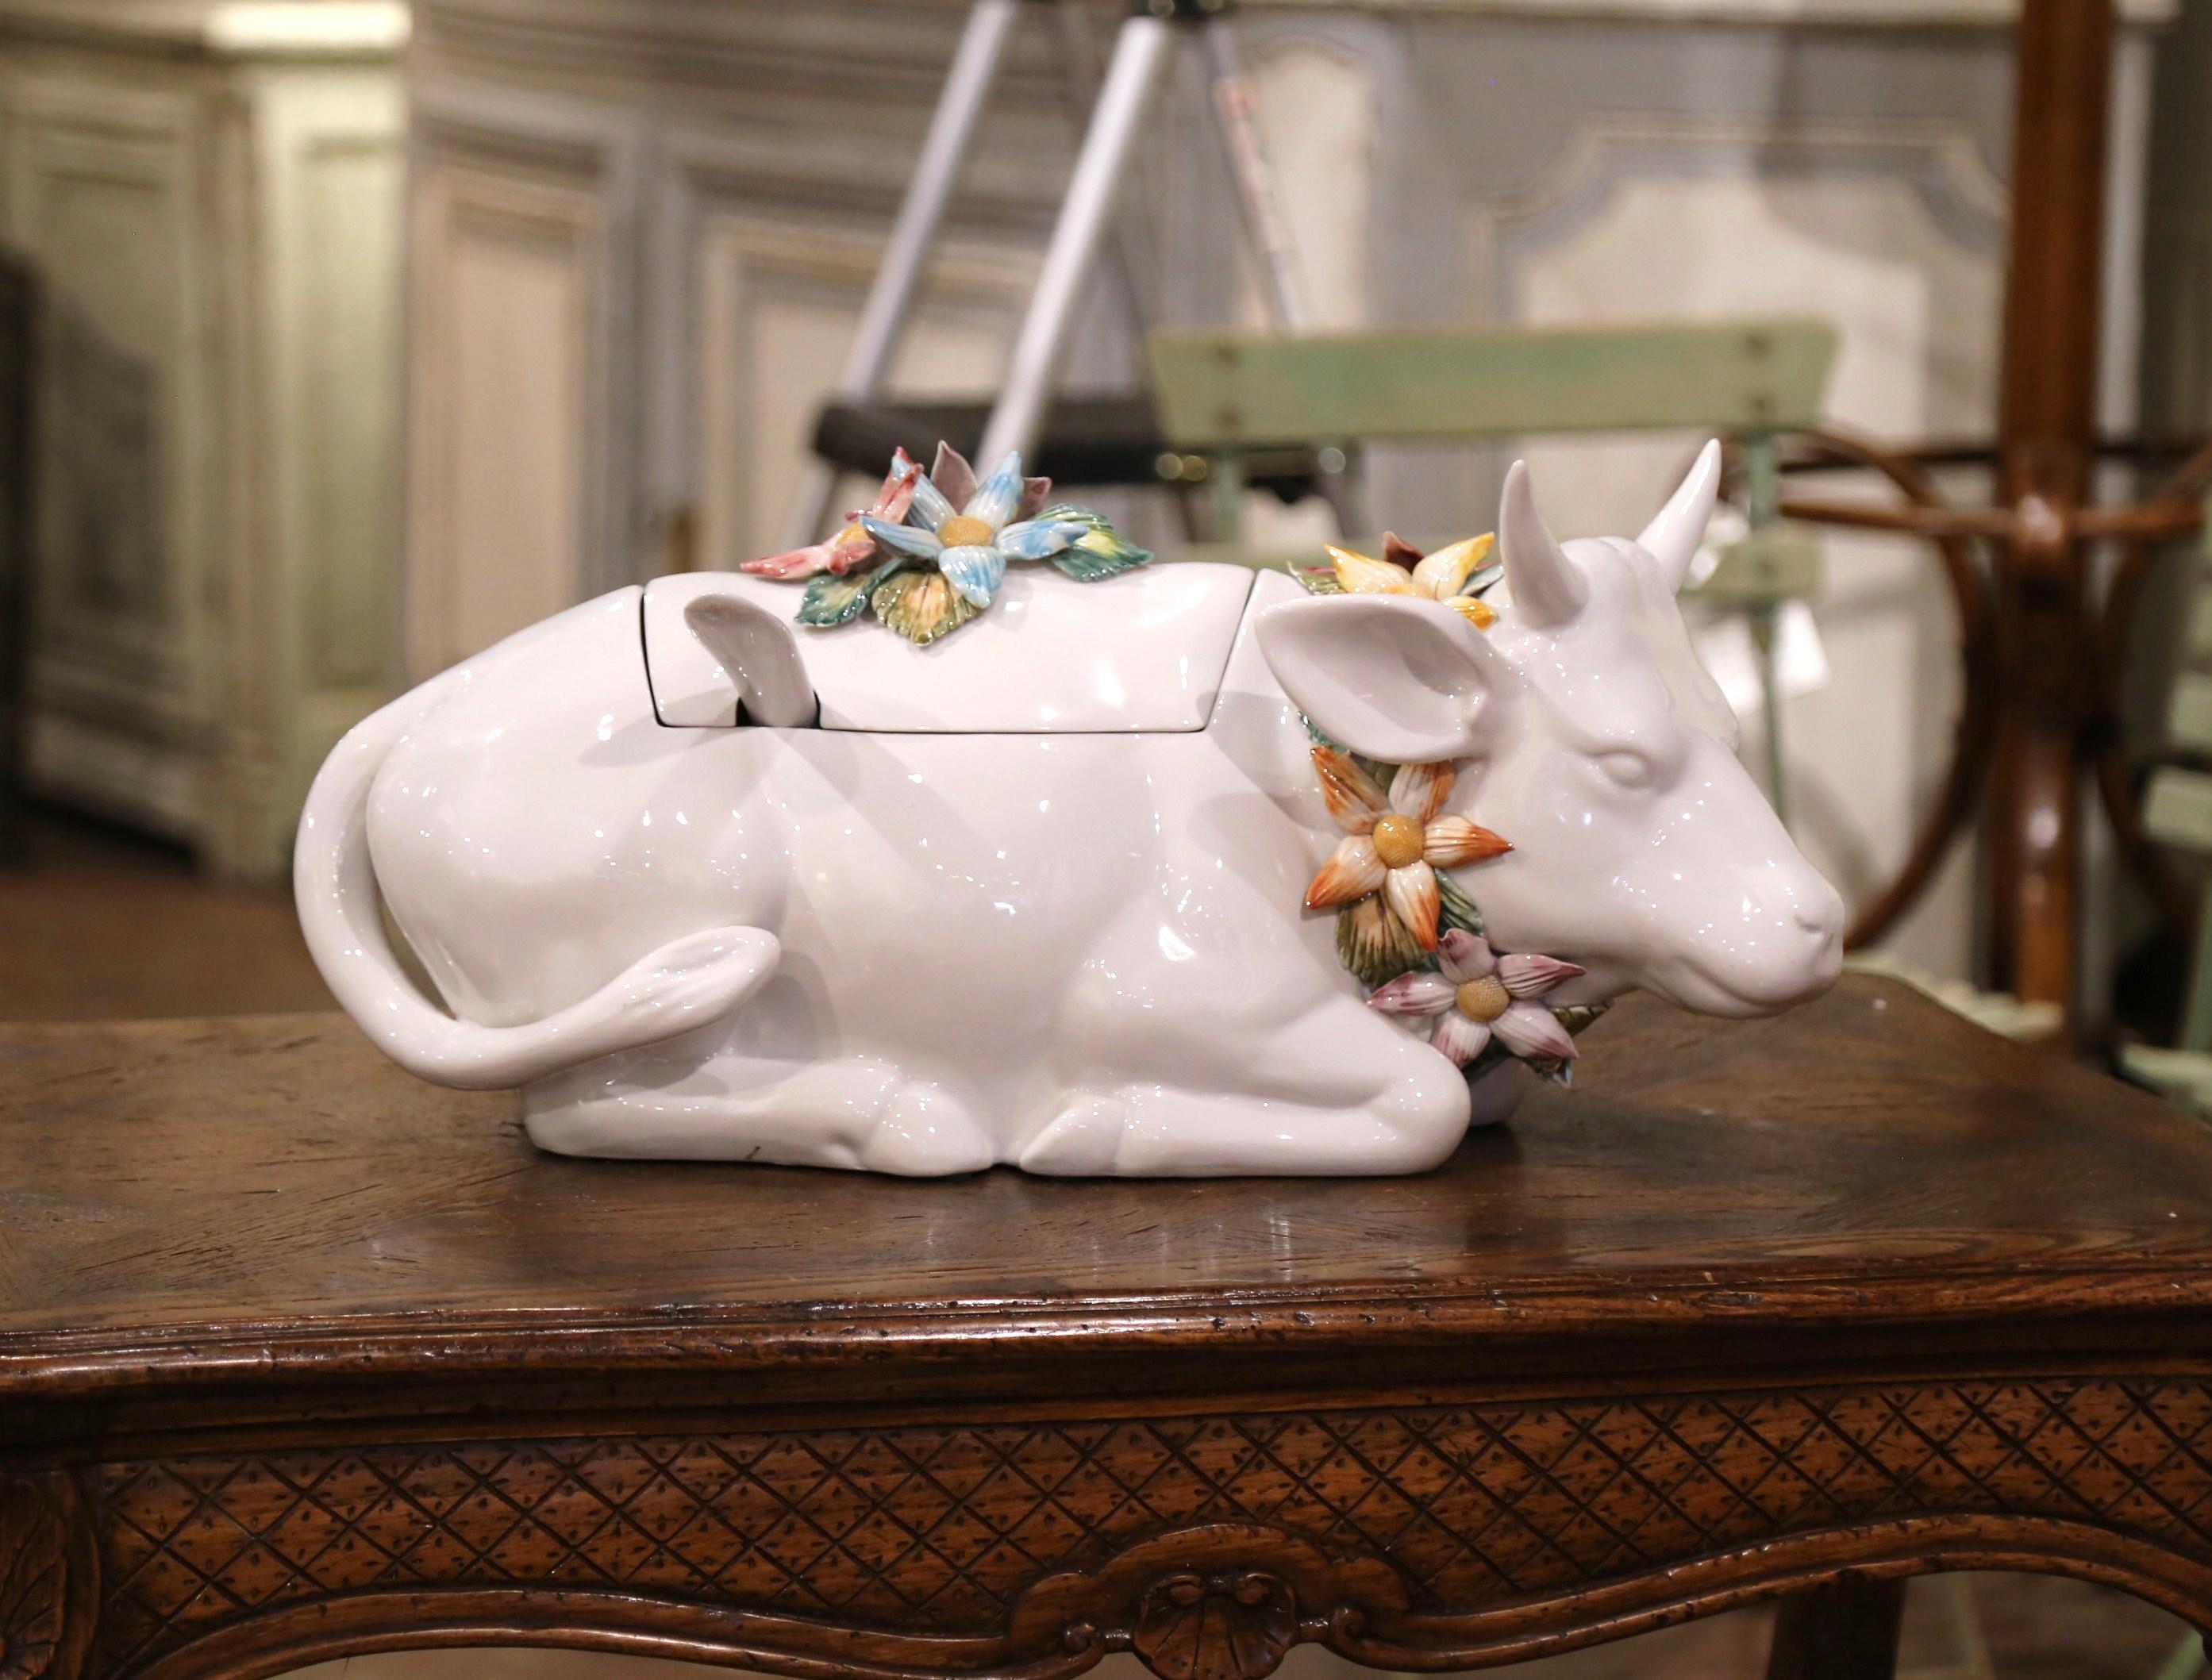 Decorate a dining table with this elegant and colorful Majolica centerpiece. Crafted in France circa 1980, the ceramic tureen is shaped as a cow resting and decorated with a necklace of flowers round the neck. The lid, embellished with a handle made